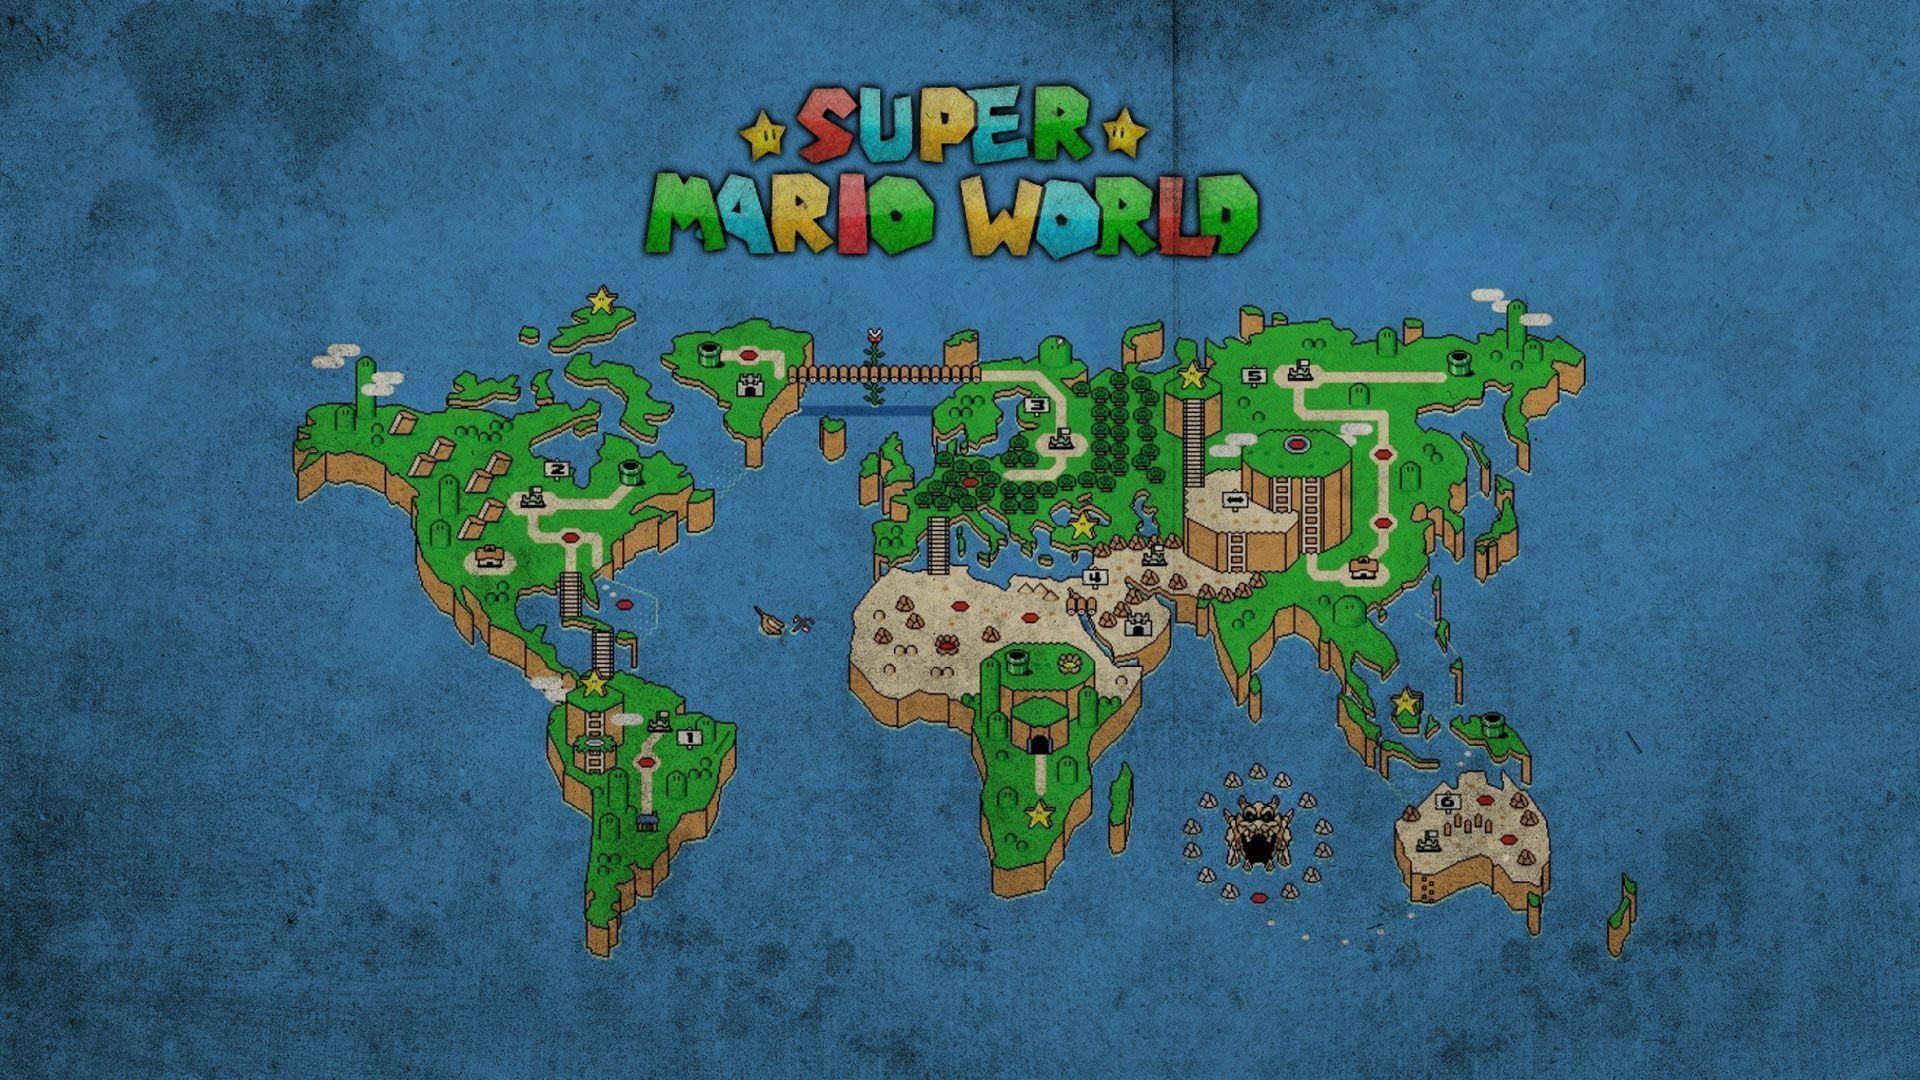 Super Mario World Map Wallpapers Top Free Super Mario World Map Backgrounds Wallpaperaccess 9143